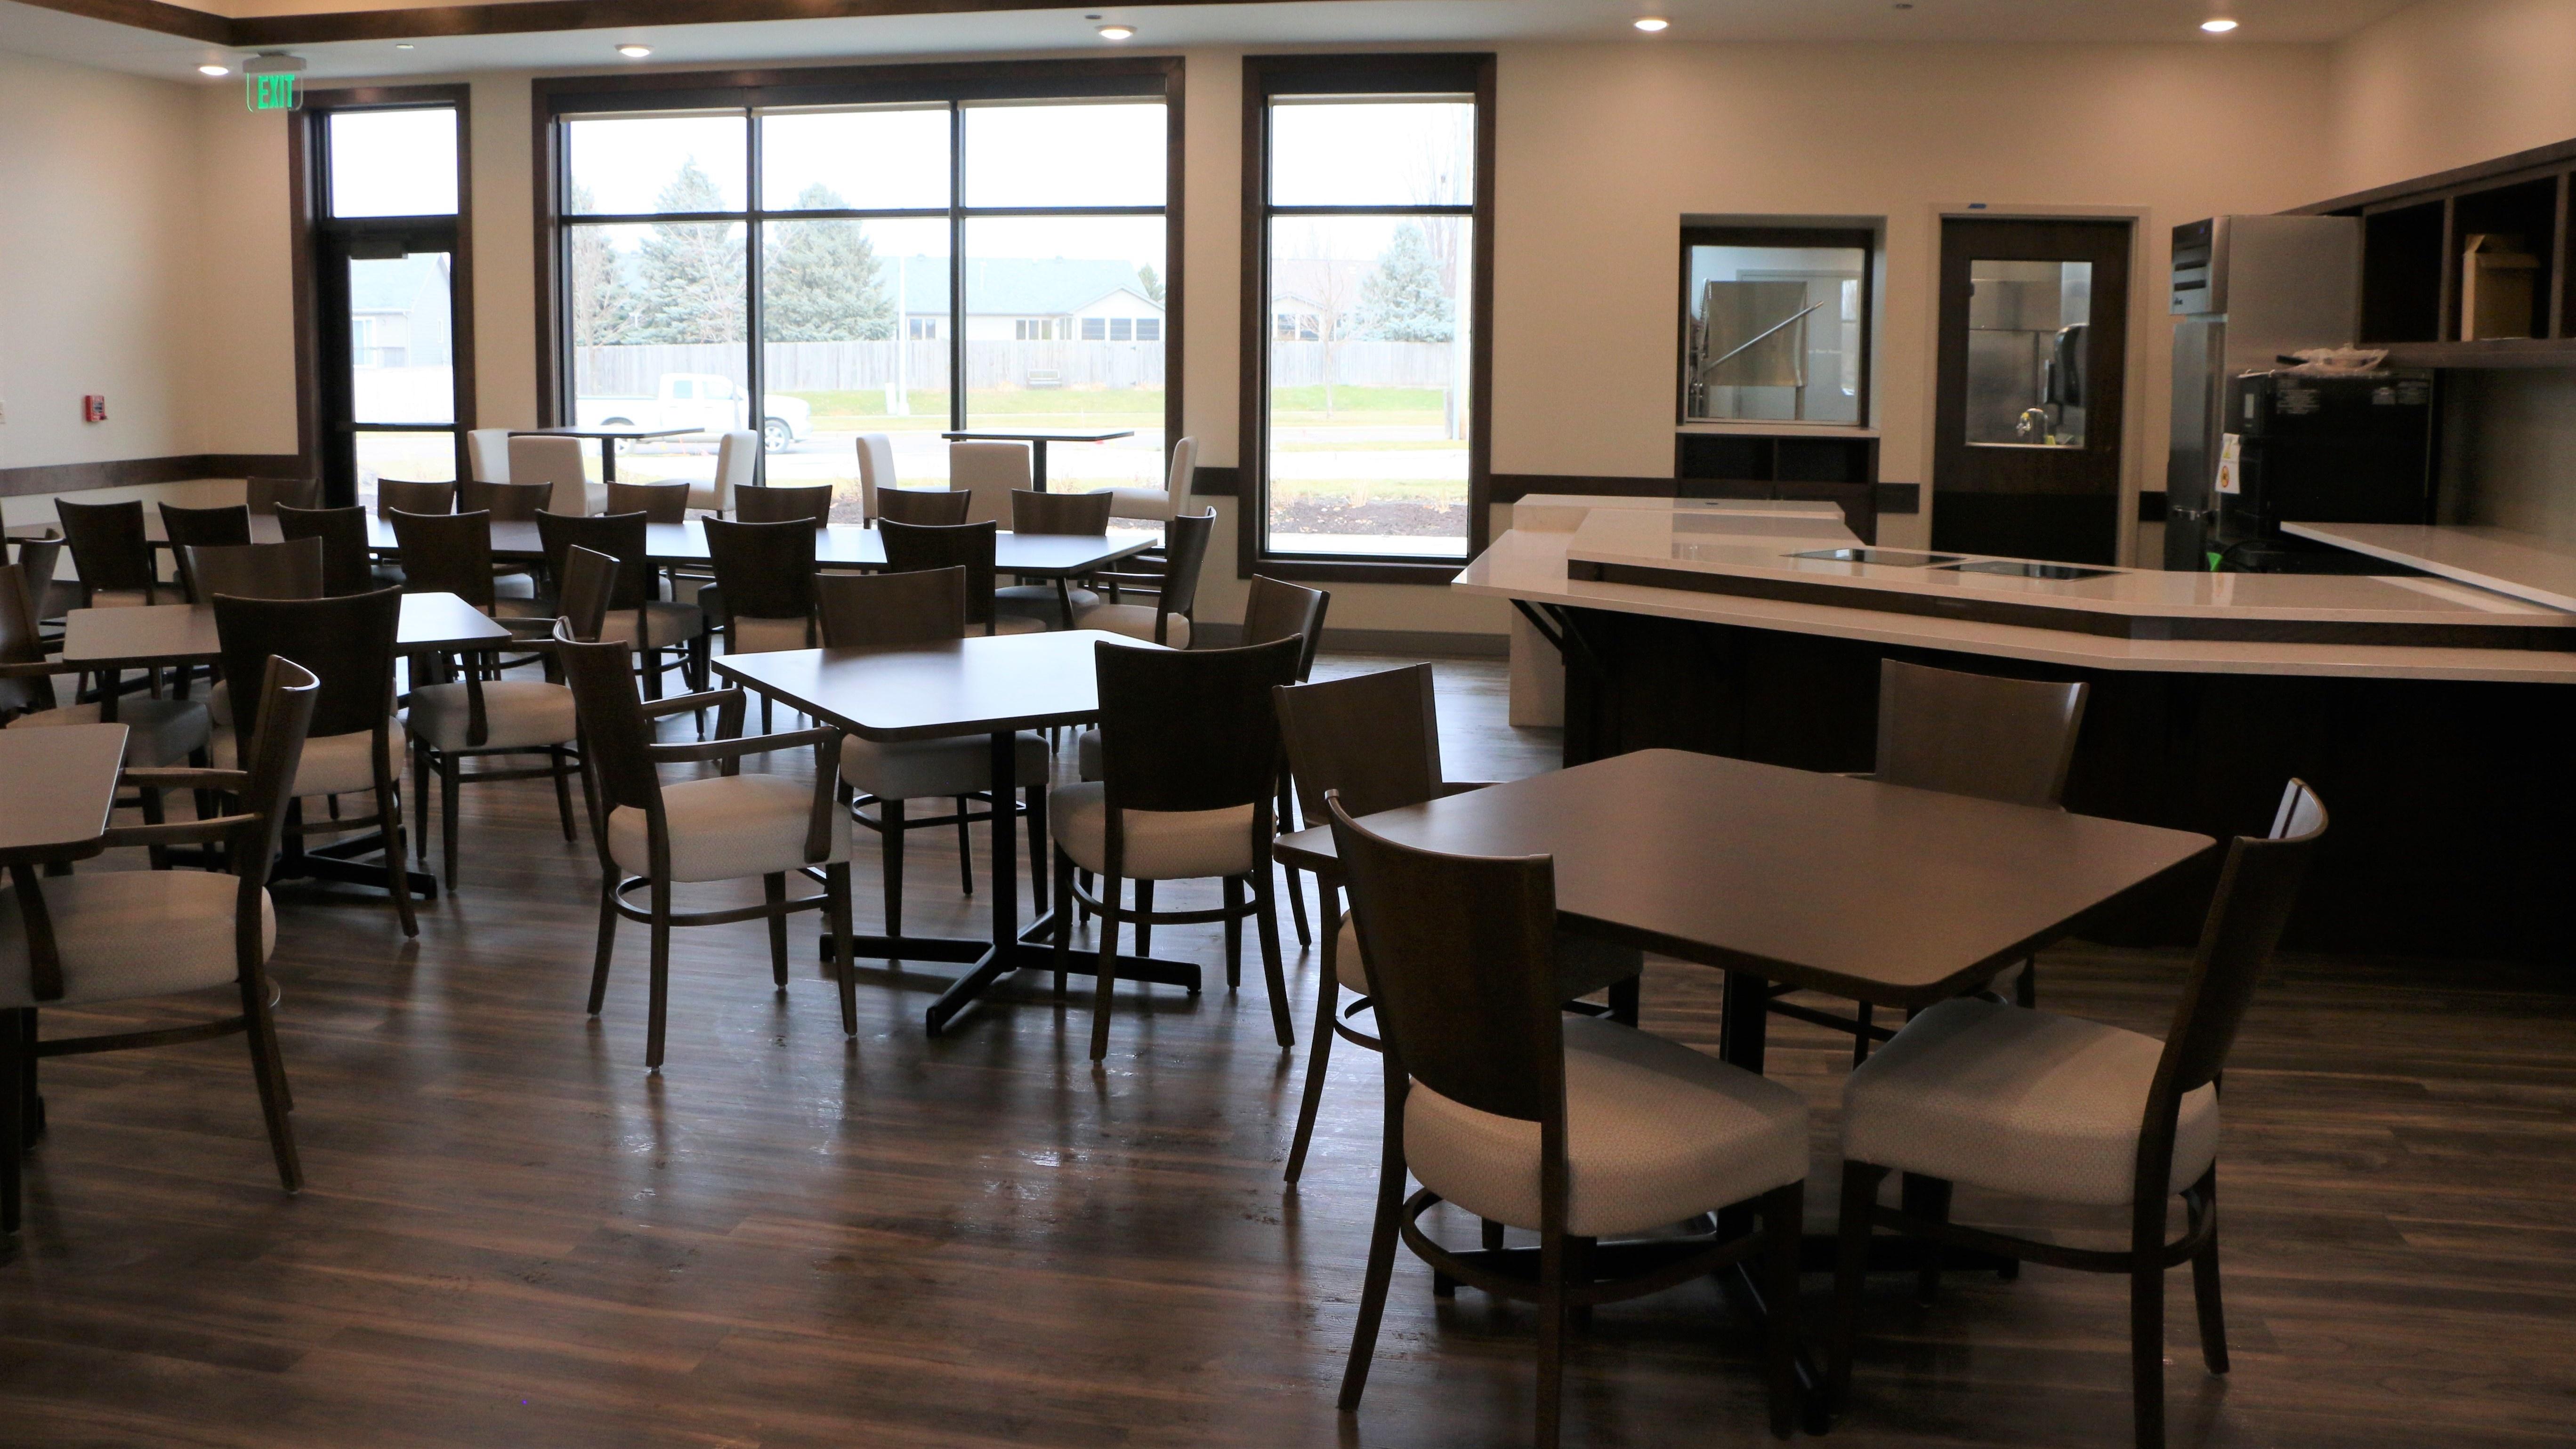 The empty dining room of the new Avera Addiction Care Center in Sioux Falls, with a large window, several tables and chairs.